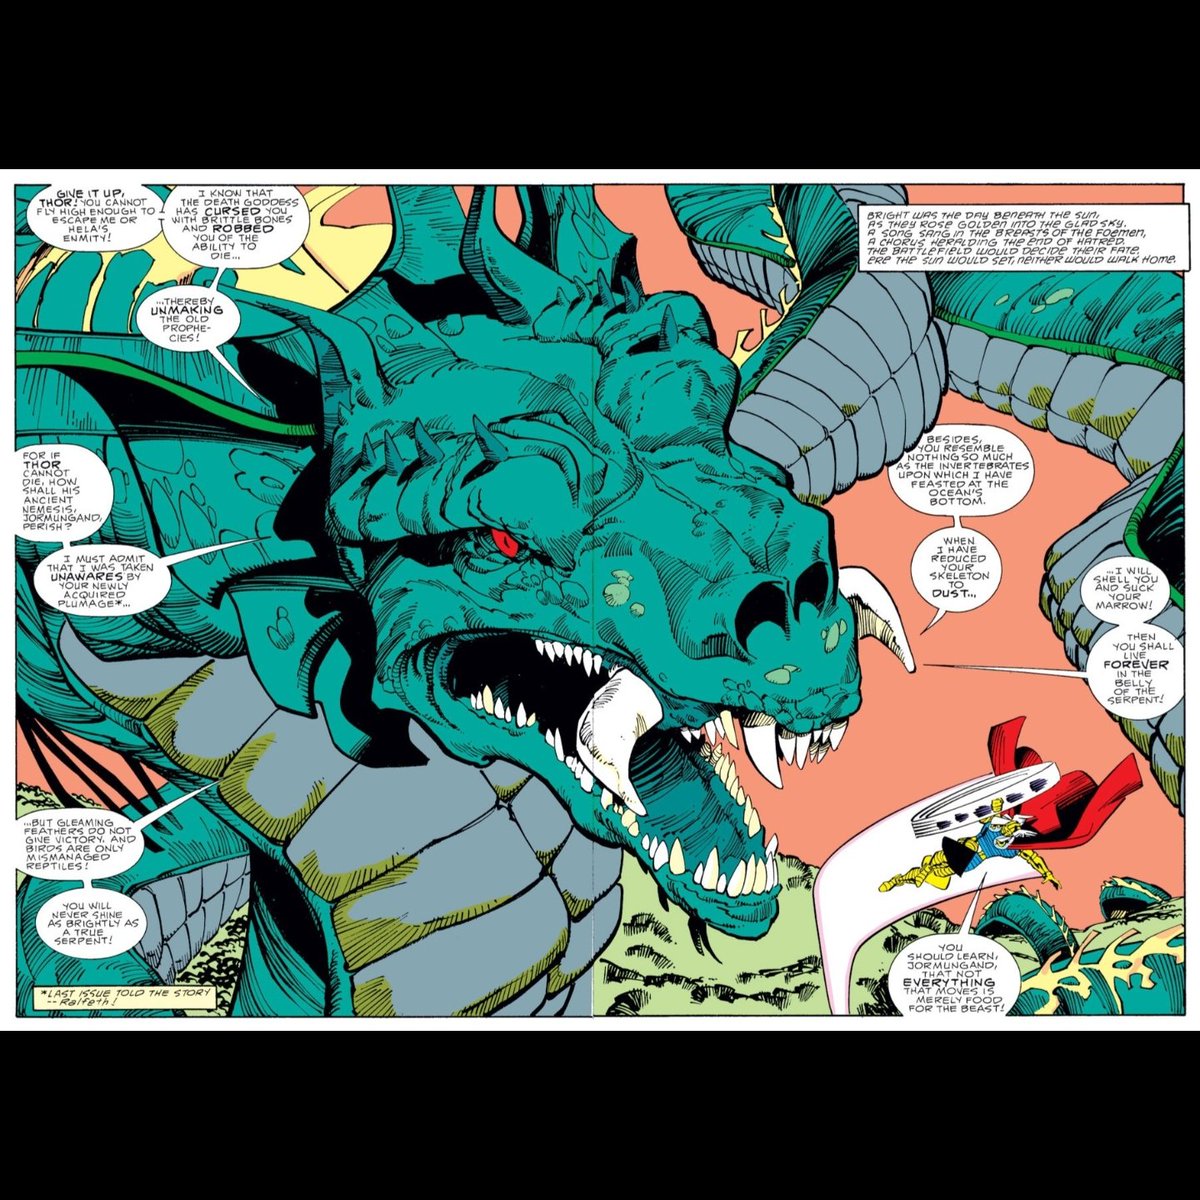 A double page spread from The Mighty Thor # 380 by Walt Simonson & Sal Buscema.
instagram.com/p/Ci_ox1Jvbo8/…
#waltsimonson #salbuscema #themightythor #jormungand #midgardserpent #marvelcomics #thecosmiccomicbookbroadcast #comicbookbroadcaster #comicbooks #thewholepicture